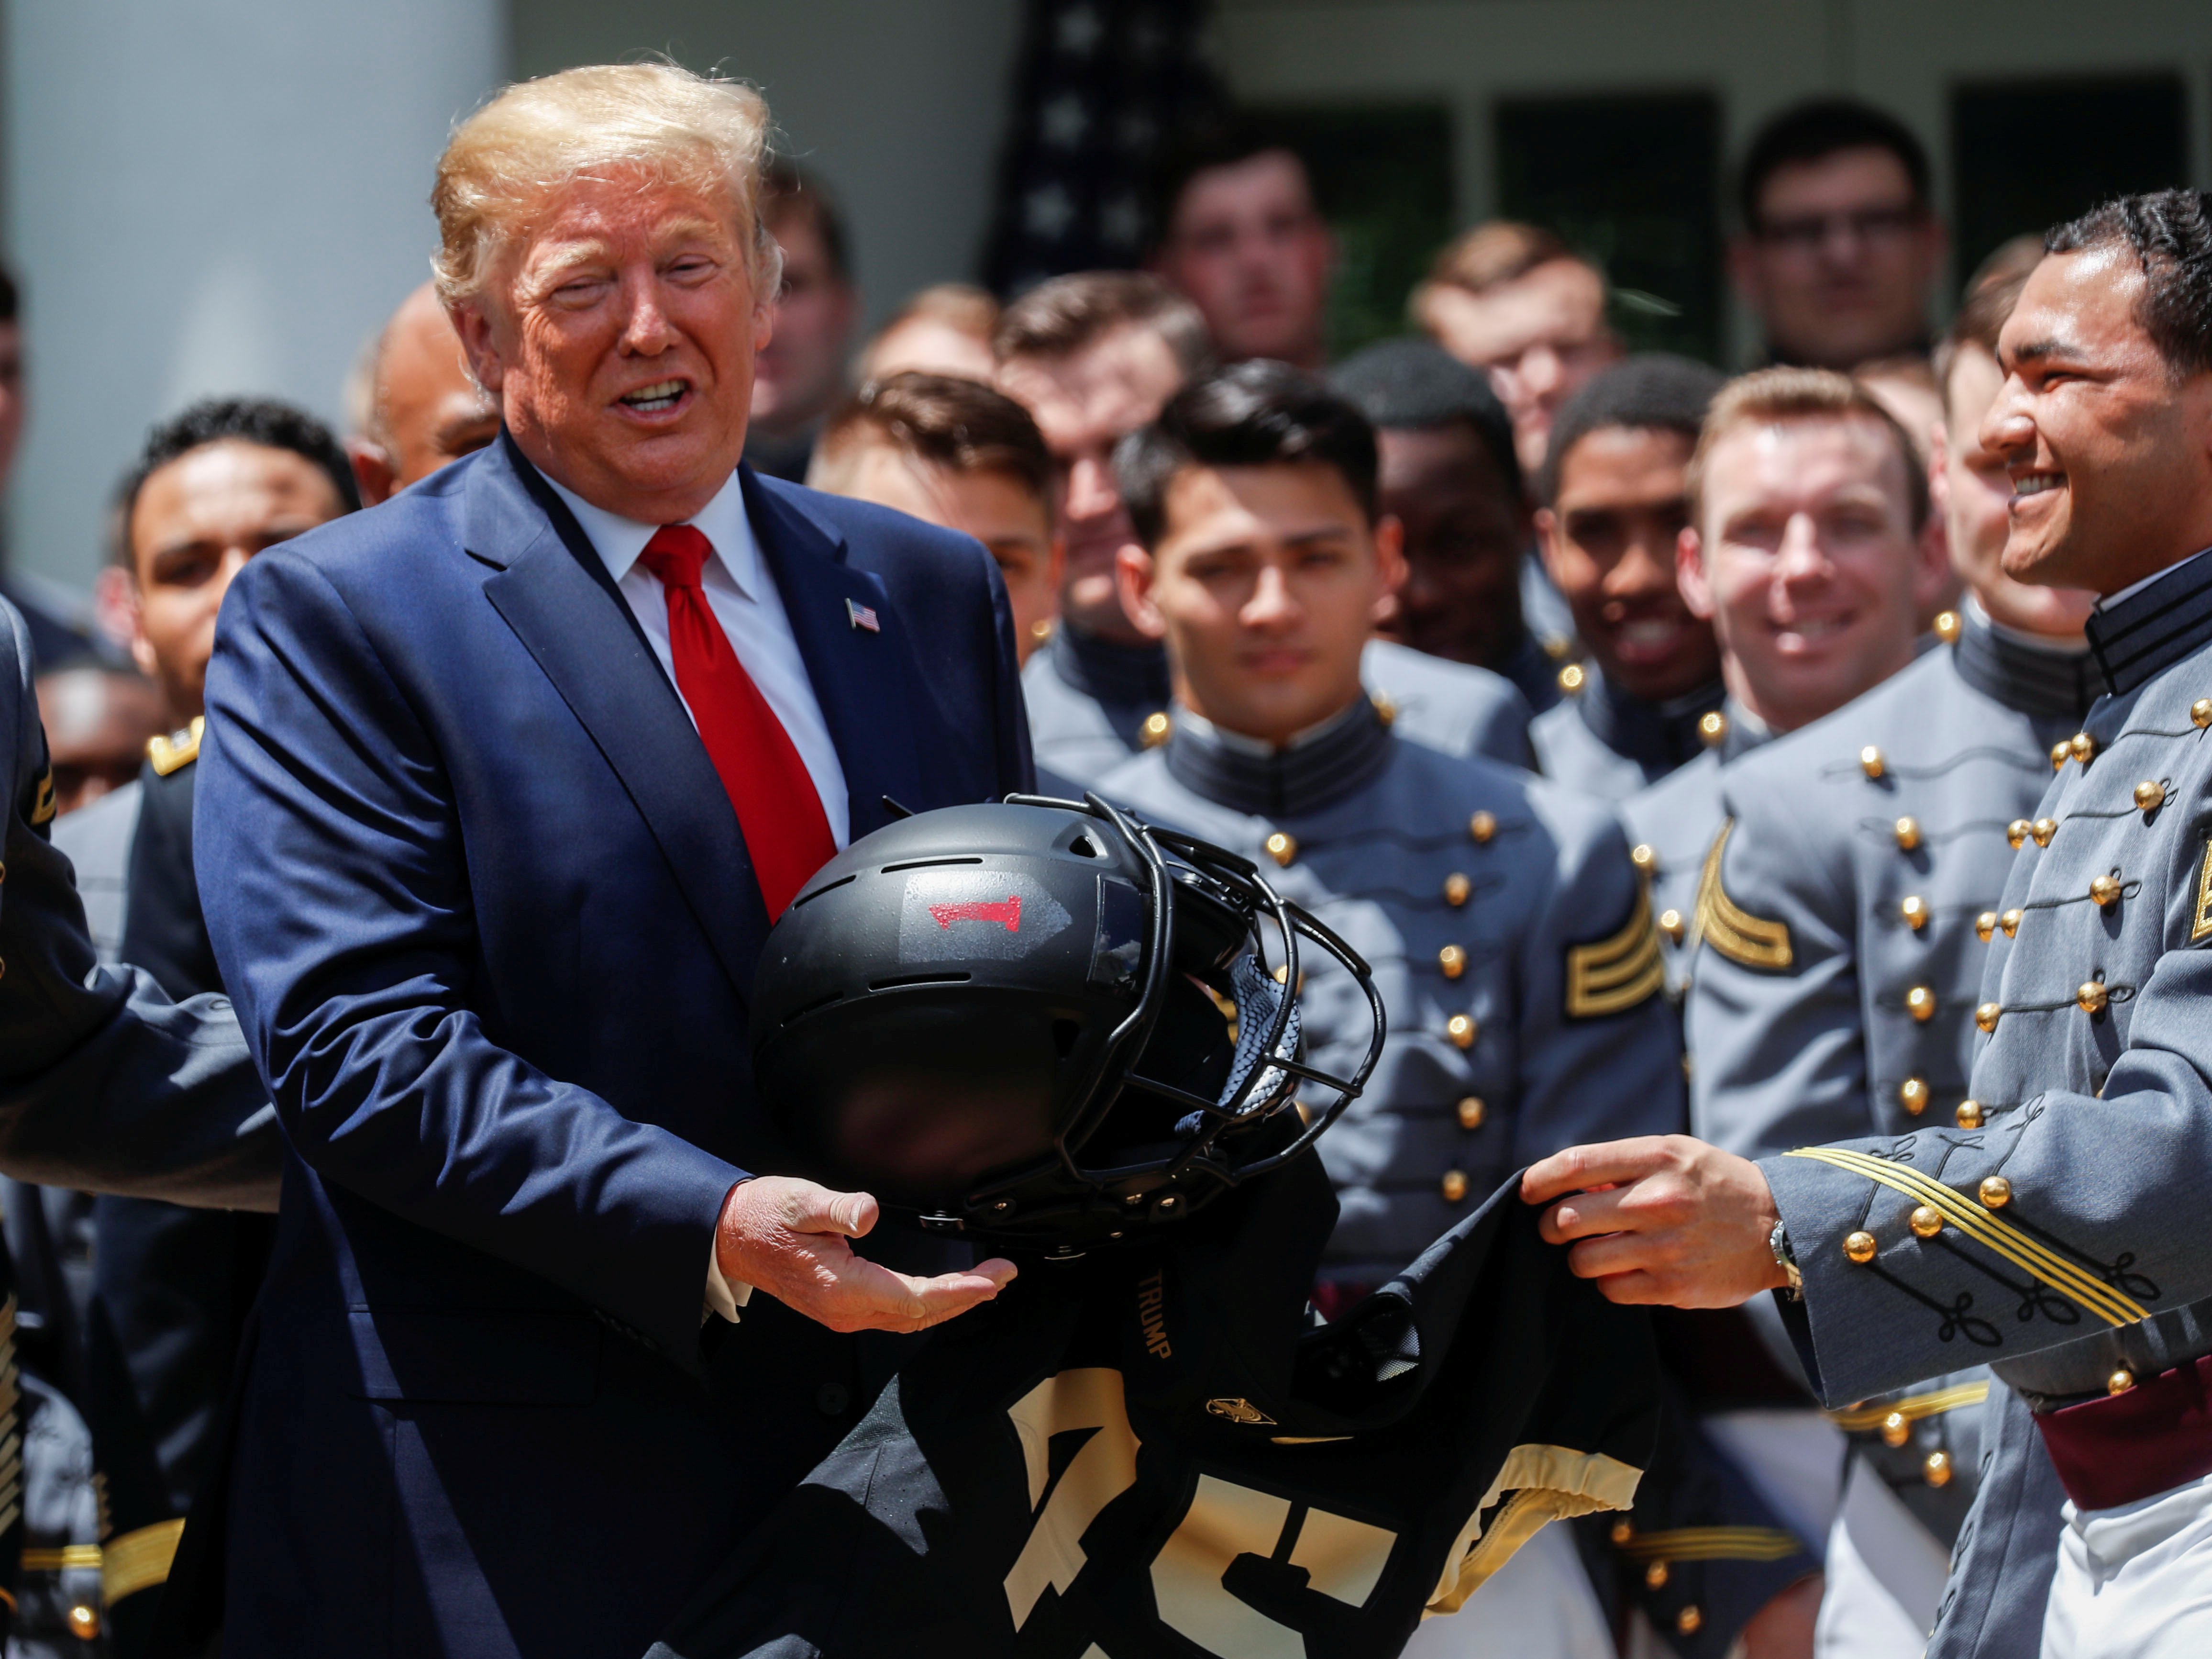 Trump honors the U.S. Military Academy in the Rose Garden at the White House in Washington, U.S., May 6, 2019. REUTERS/Kevin Lamarque